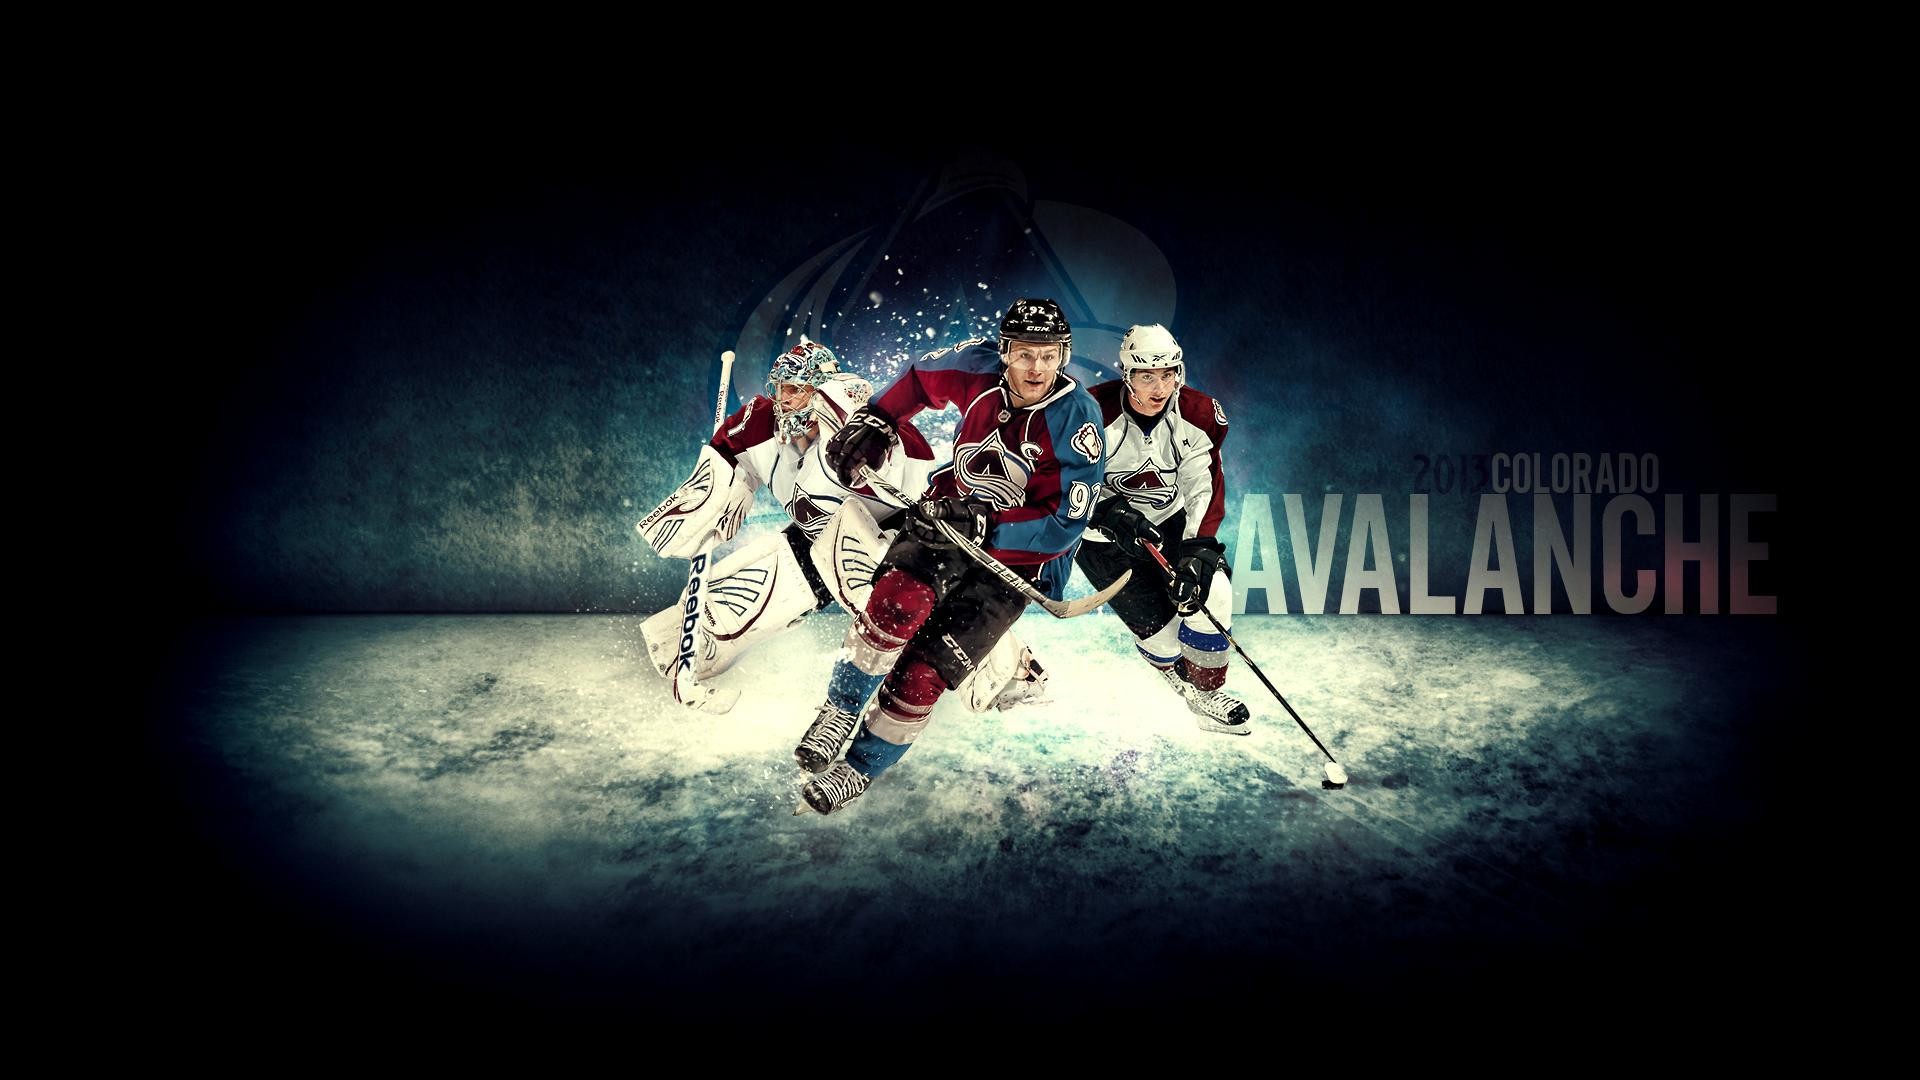 Cool Hockey Backgrounds.